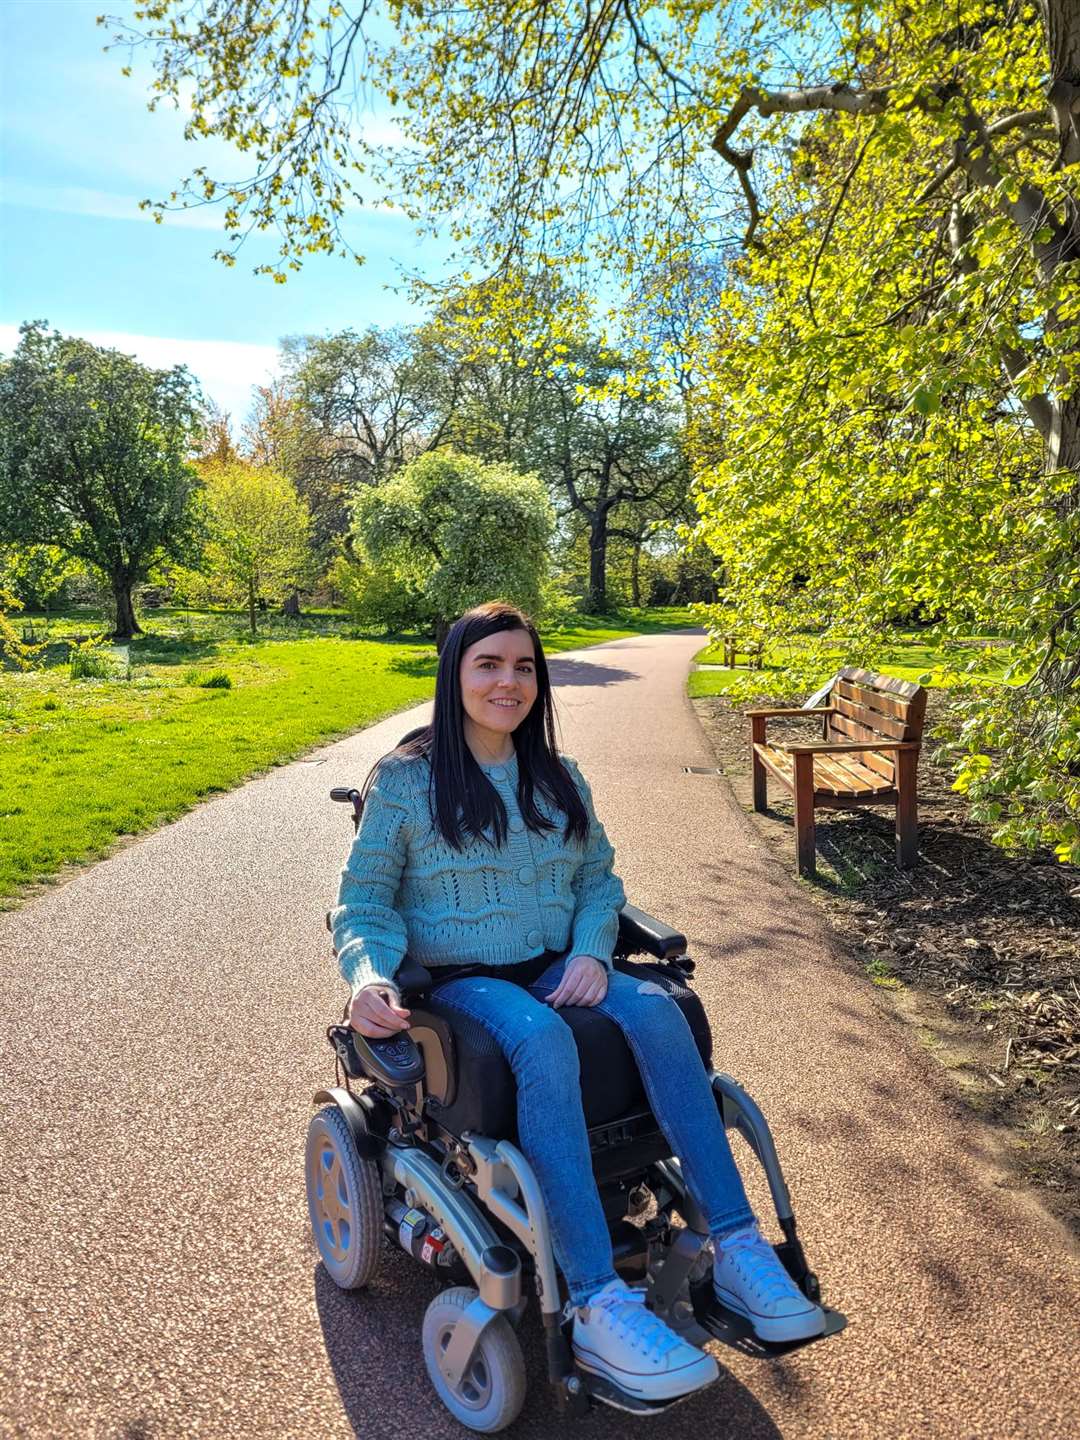 Emma Muldoon: "I love finding new walks and those little hidden gems that are great to explore and suitable for my wheelchair."